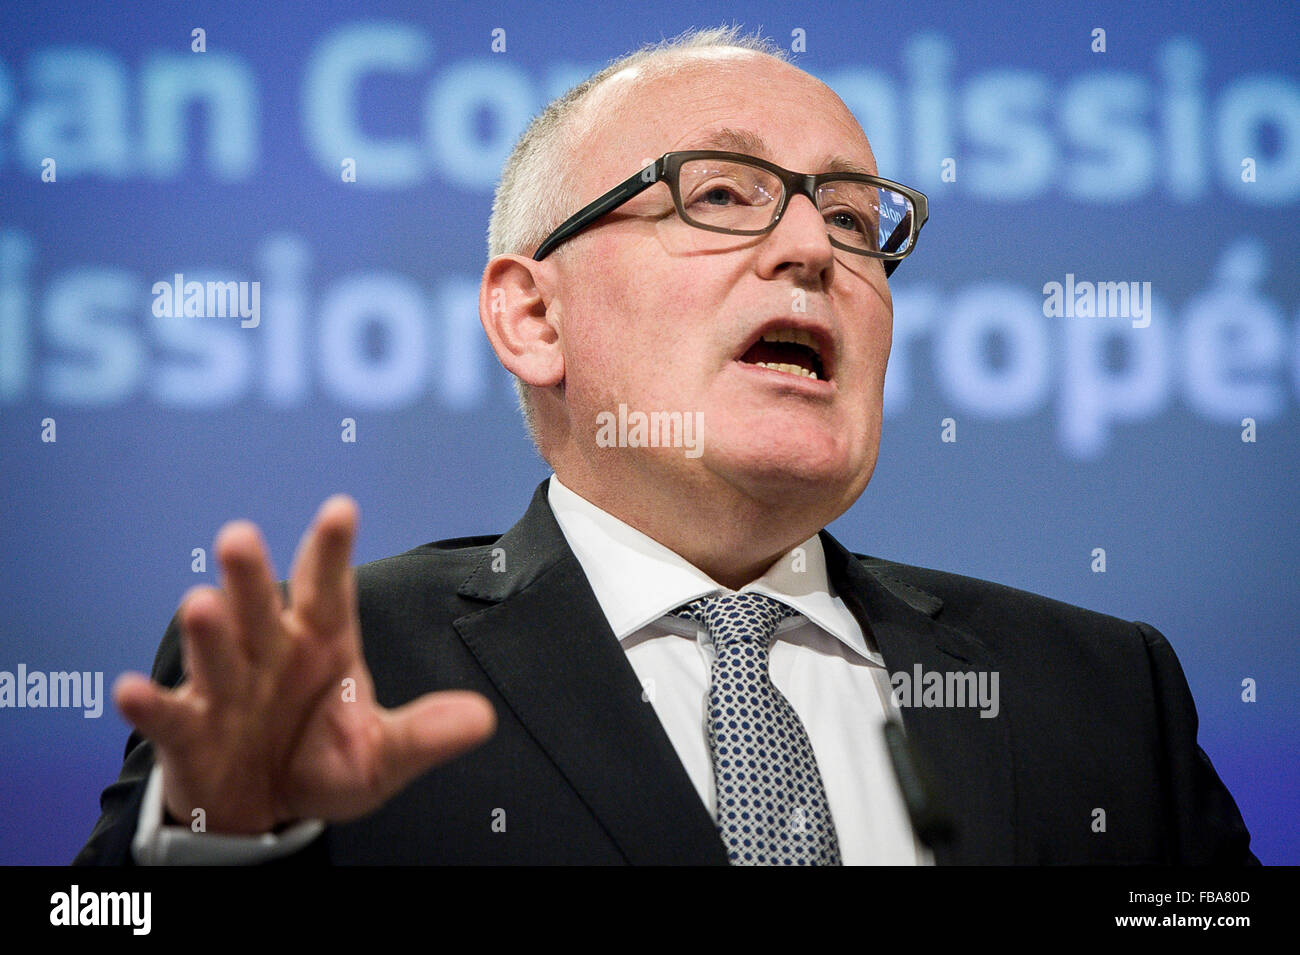 Frans Timmermans, First vice-president of the European Commission for better regulation, inter-institutional relations, the rule of law, and the Charter of Fundamental Rights holds a press conference at European Commission headquarters in Brussels, Belgium on 13.01.2016 The European Commission decided to carry out 'preliminary assessment' on the issue of Polish constitutional court under rule of law procedure by Wiktor Dabkowski Stock Photo